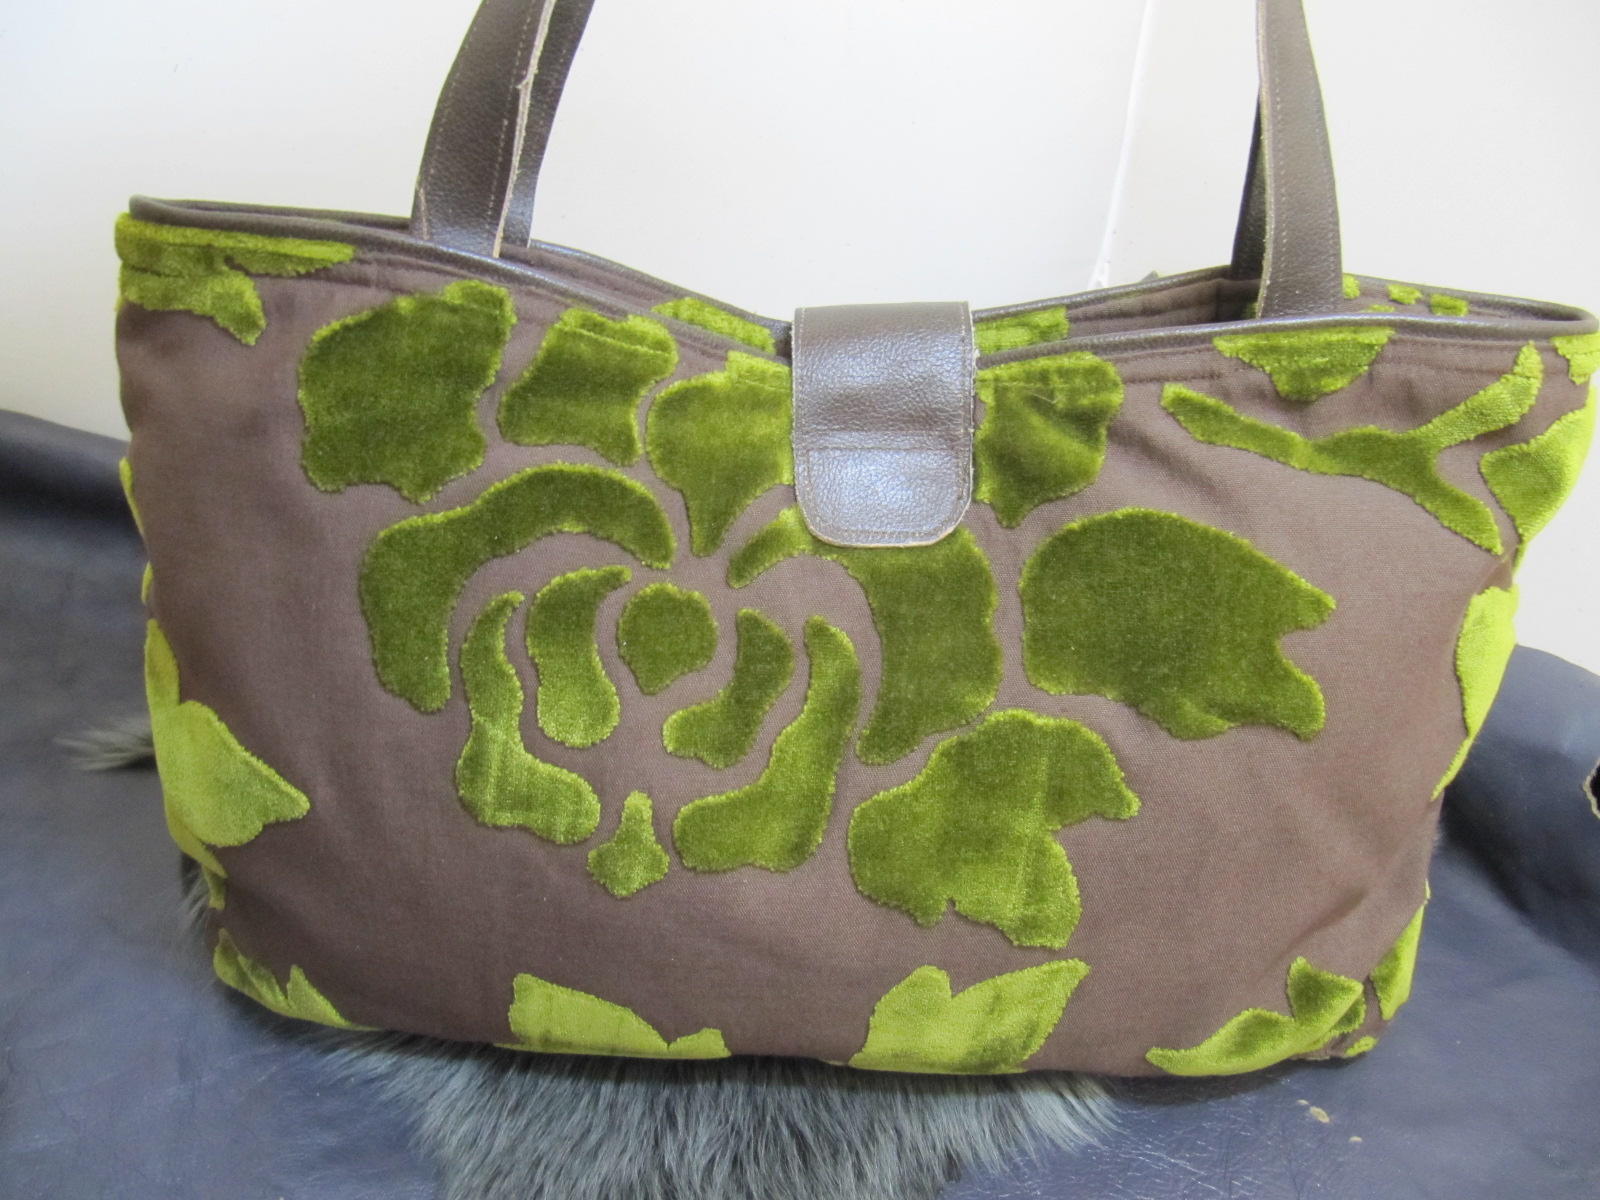 Green & Brown fabric and leather shopper